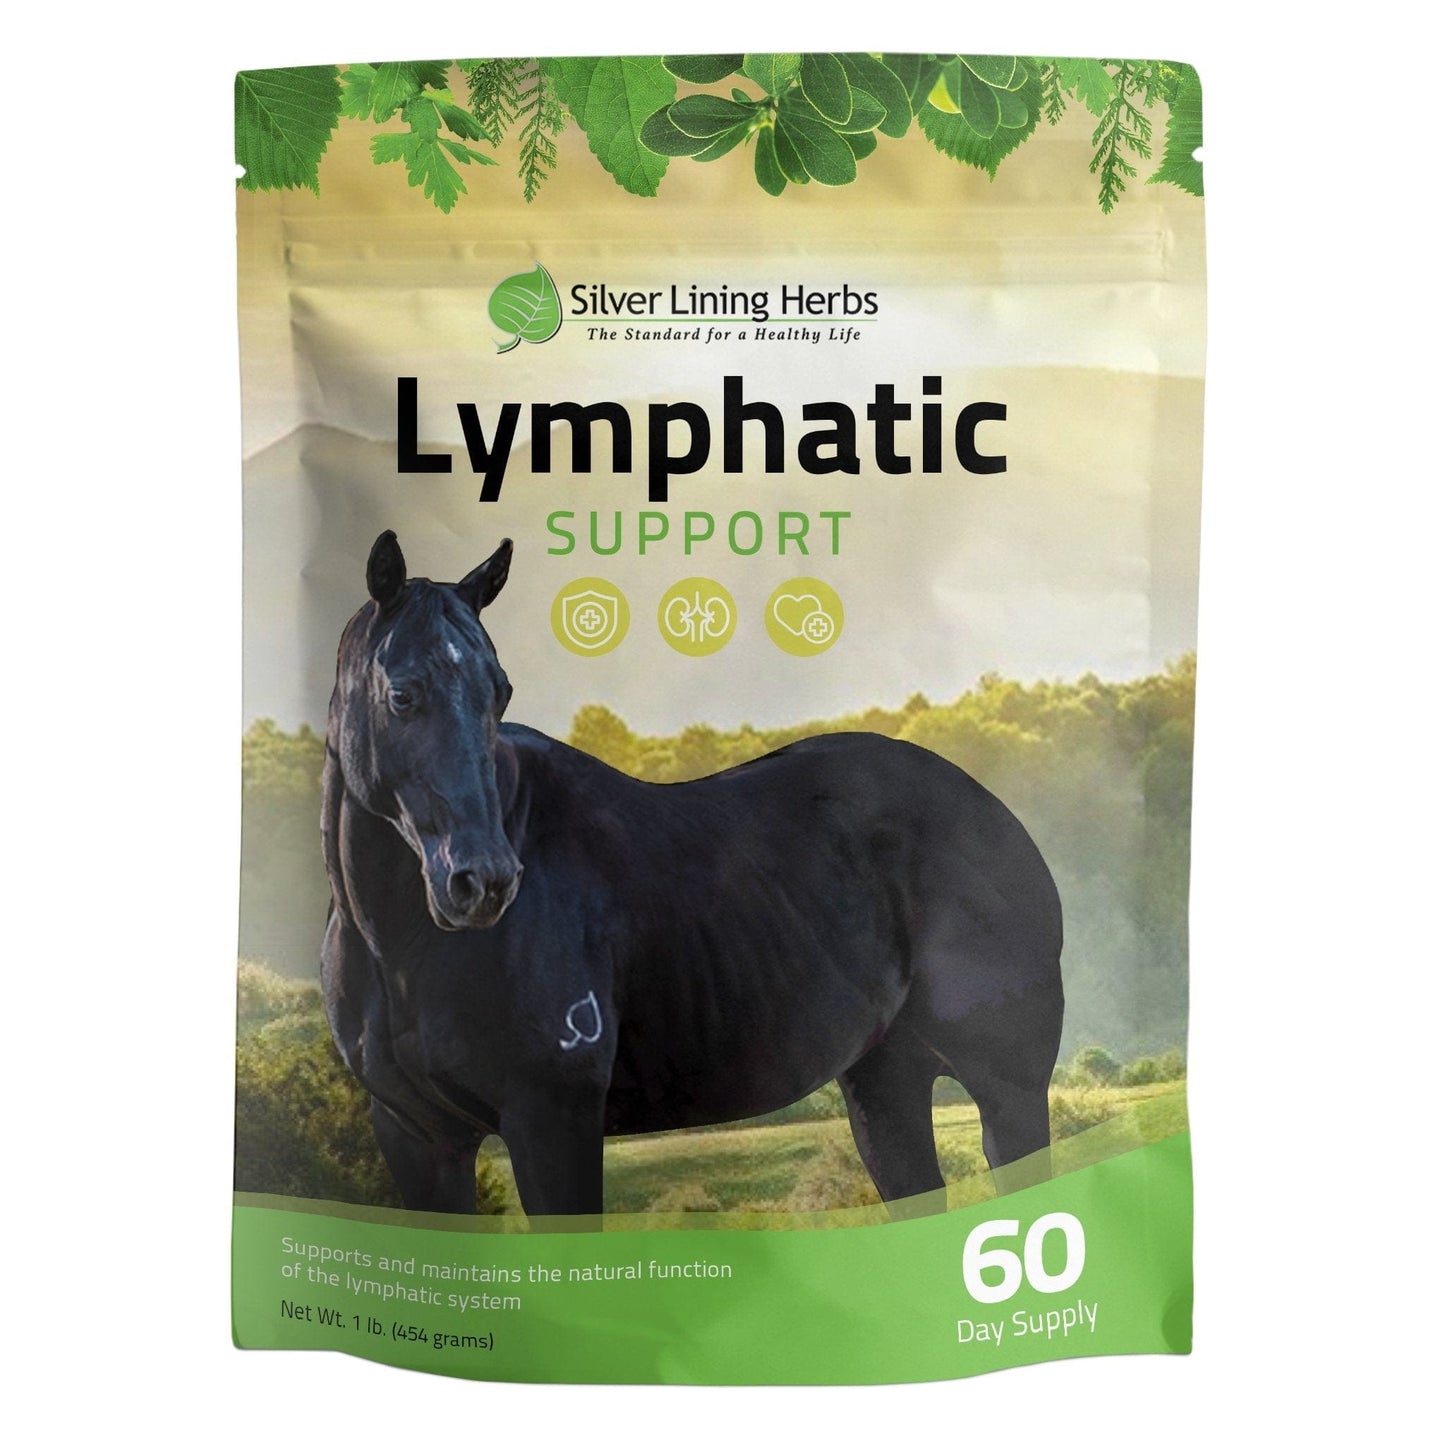 Lymphatic Support for Horses - Silver Lining Herbs